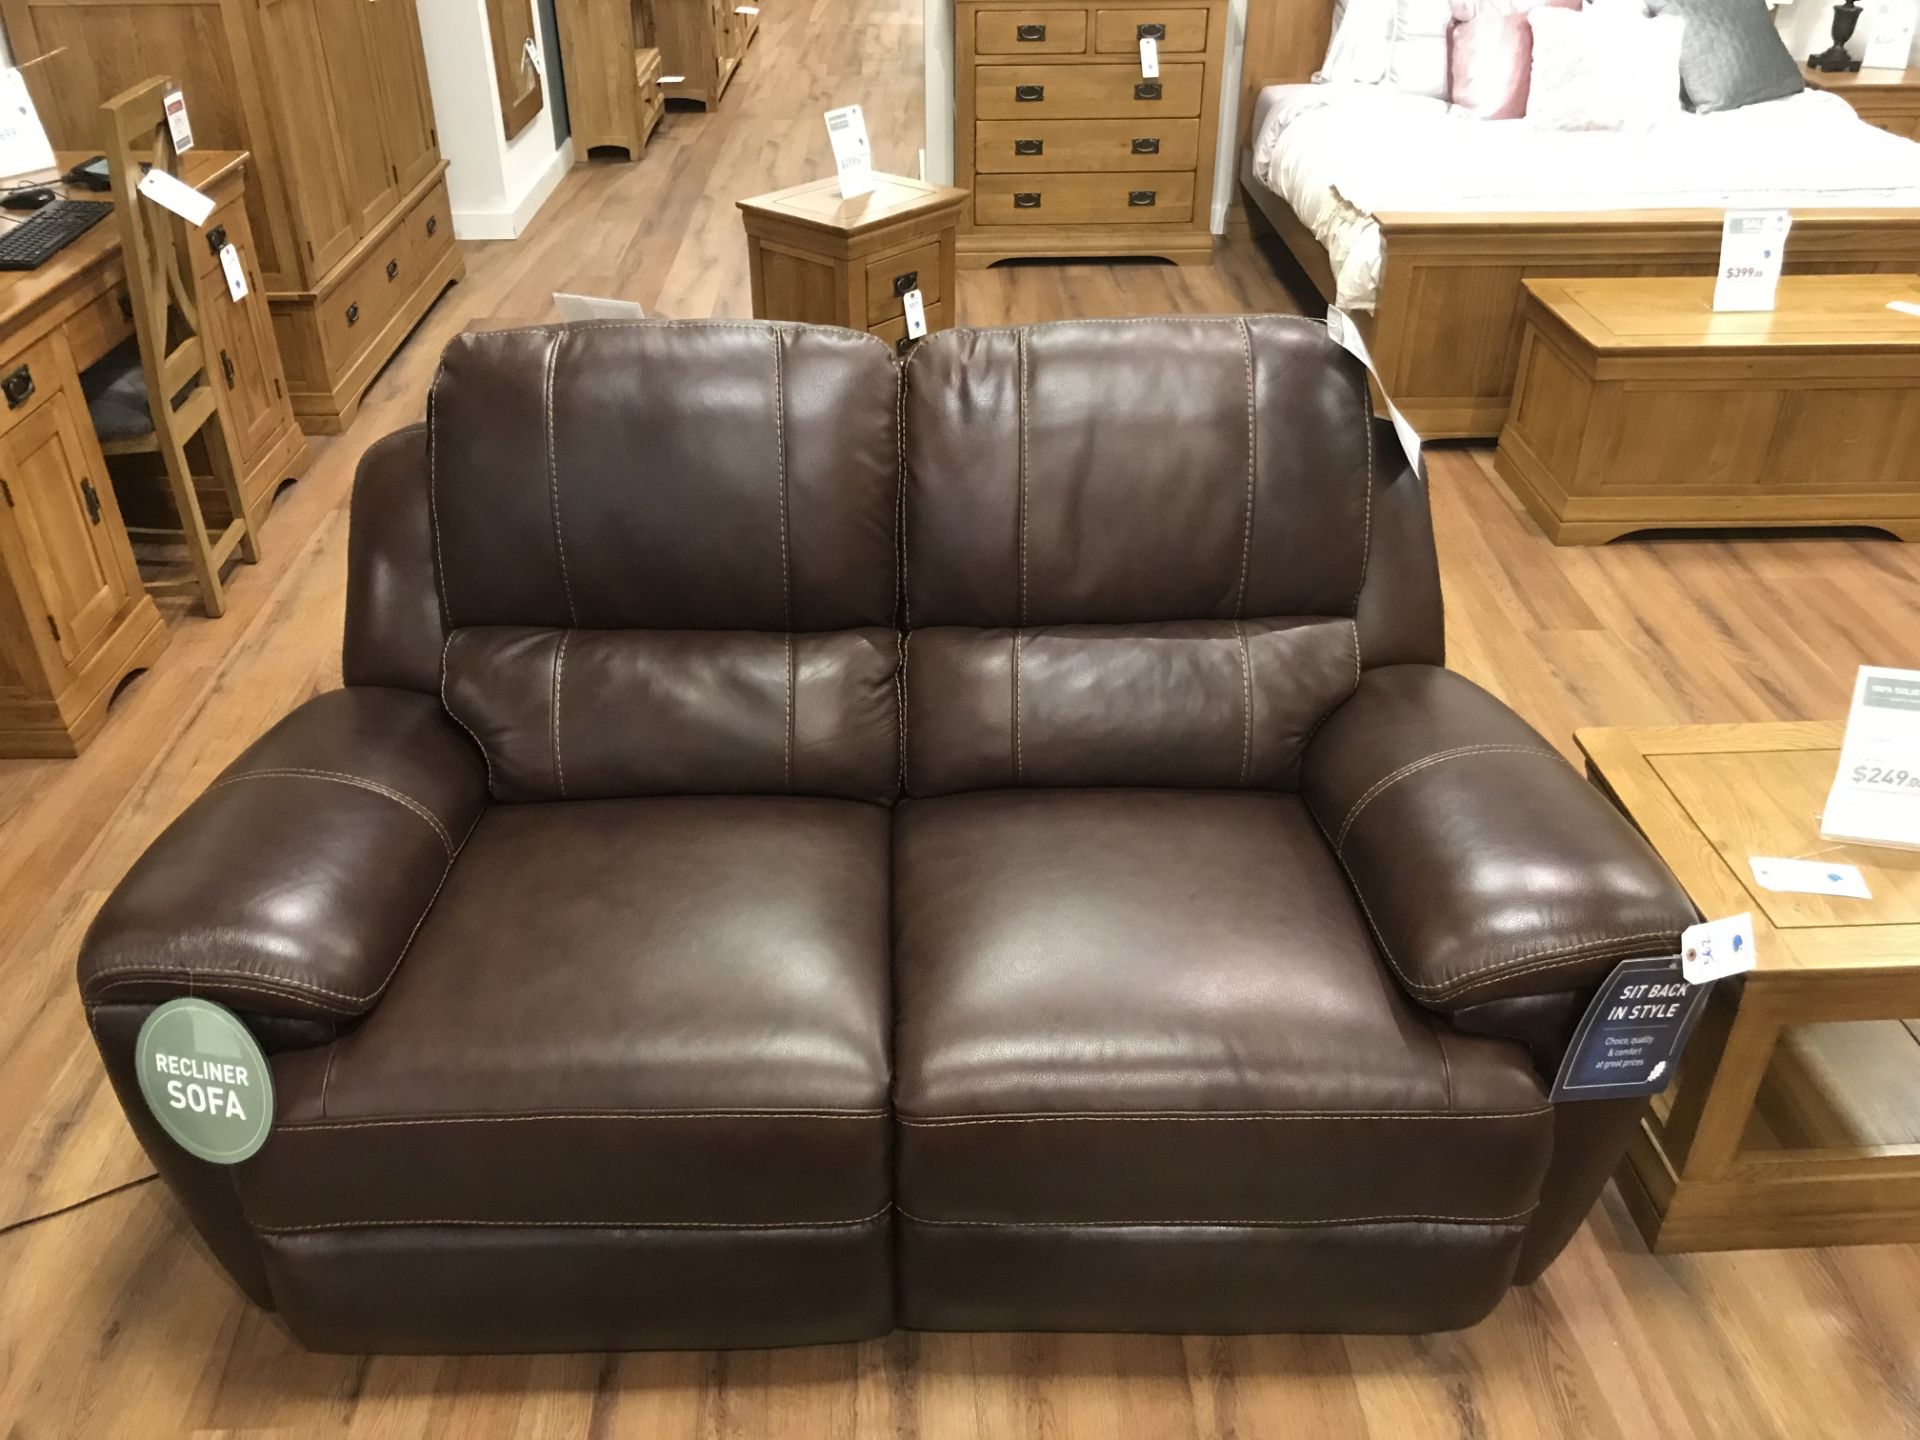 2 Seater Reclining Sofa (Finley)See Picture For Dimensions and Product Info